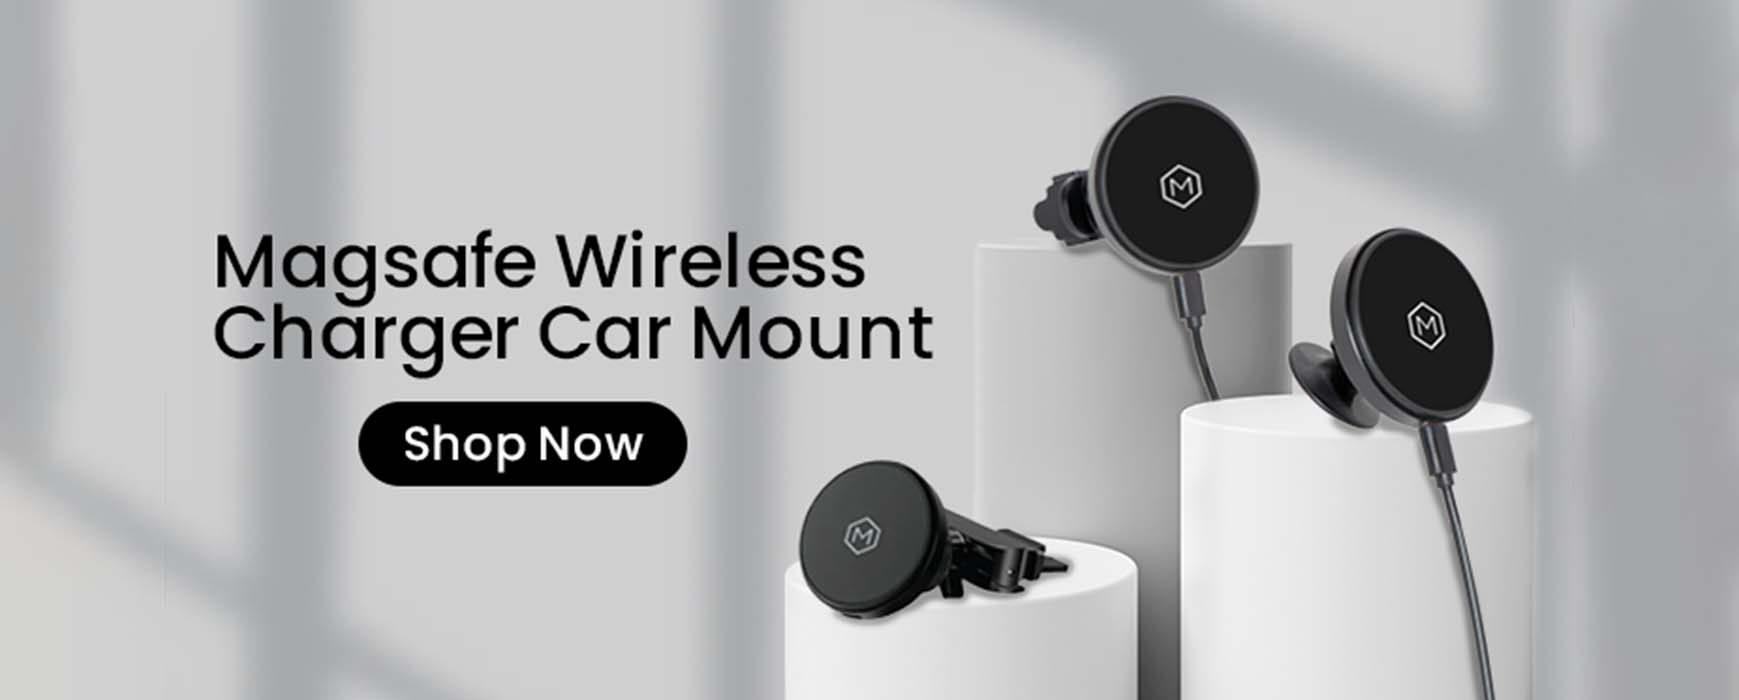 https://www.themightymount.com/collections/magsafe-car-mount-charger